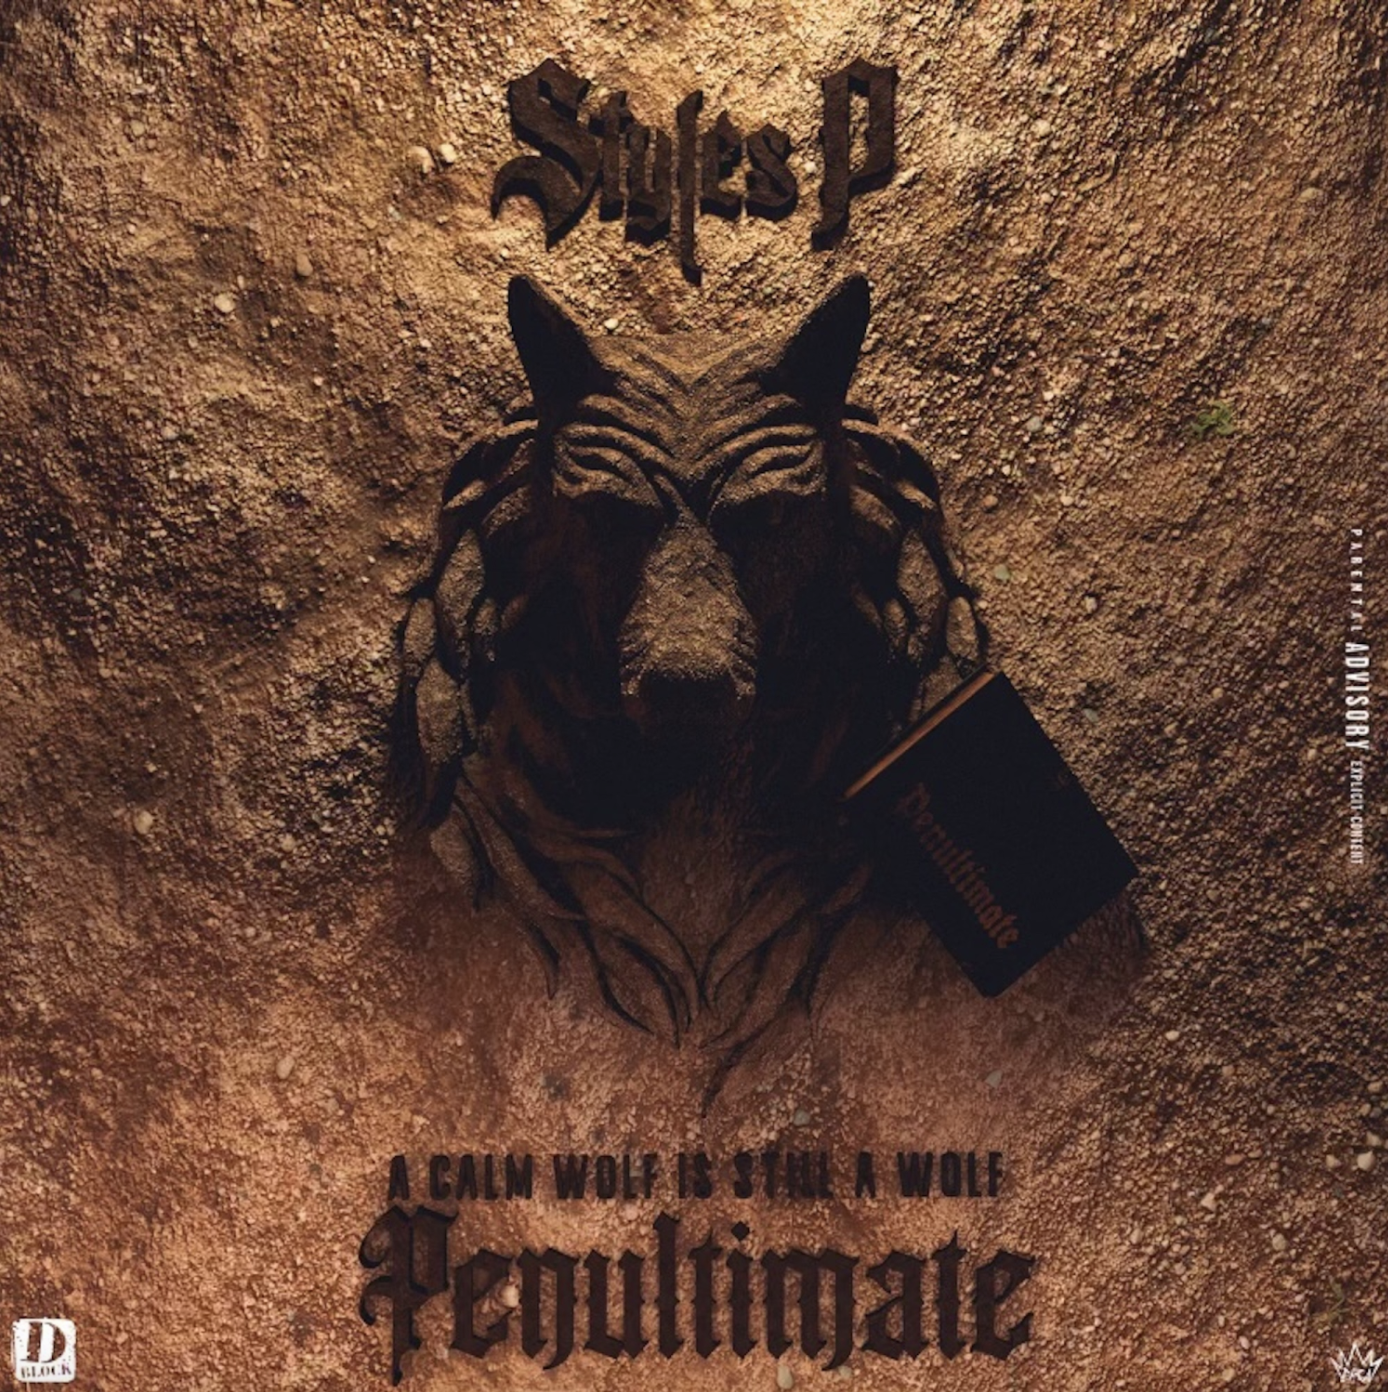 Styles P Releases 15th Album, ‘Penultimate: A Calm Wolf Is Still A Wolf’